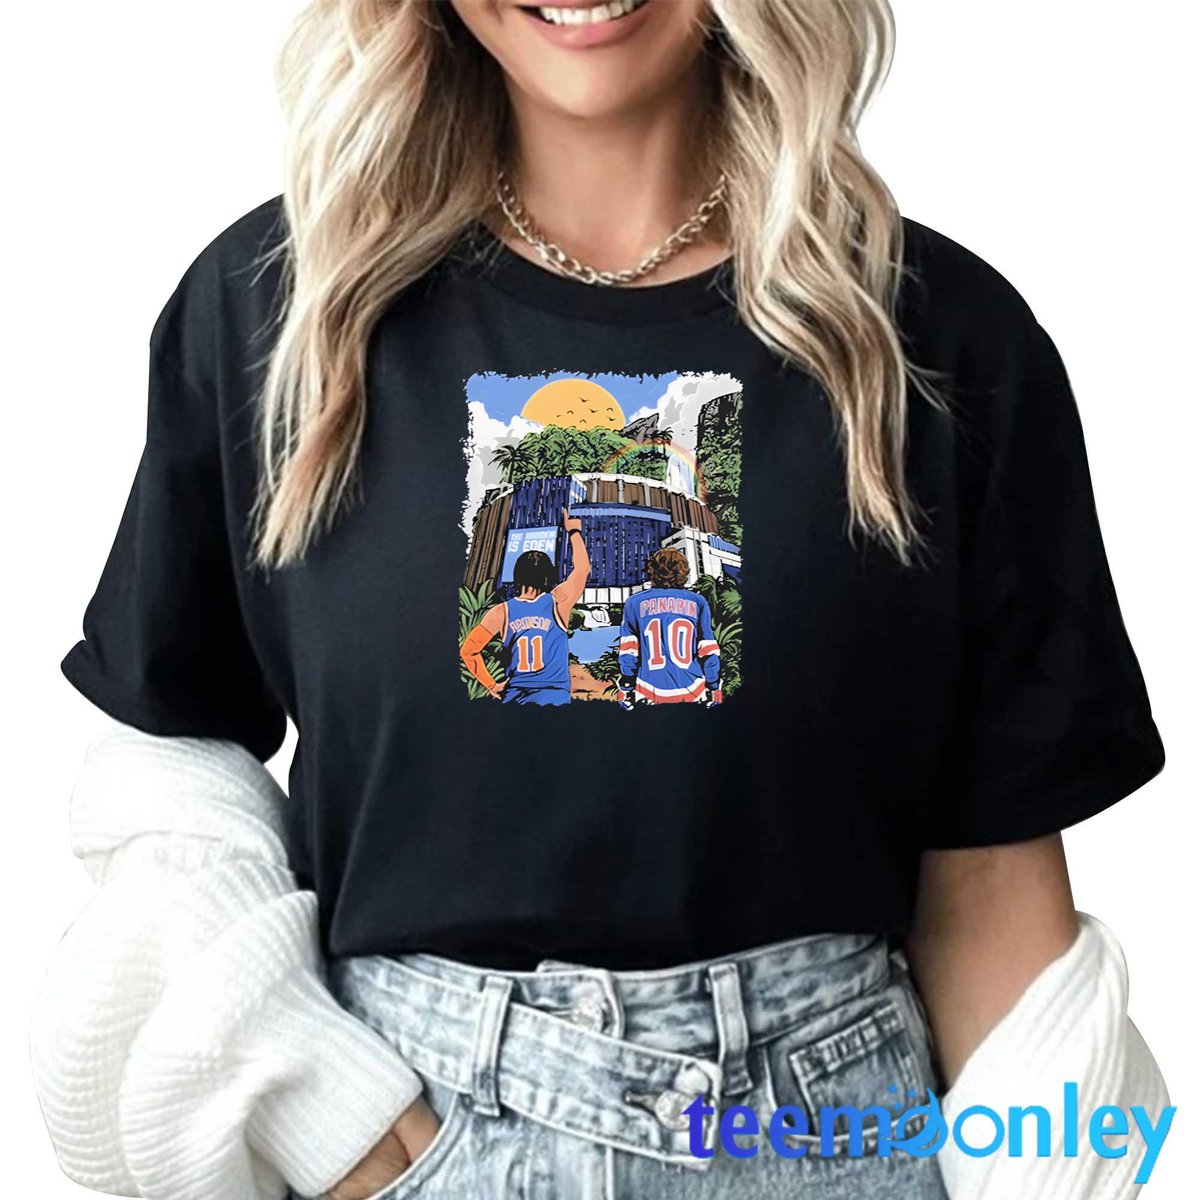 🌿 Embrace the tranquility of nature with our Matty Jack The Garden Is Eden! 🌸 Let your style bloom with this serene and stylish tee. Get yours now and bring a touch of paradise to your wardrobe!
teemoonley.com/product/matty-…